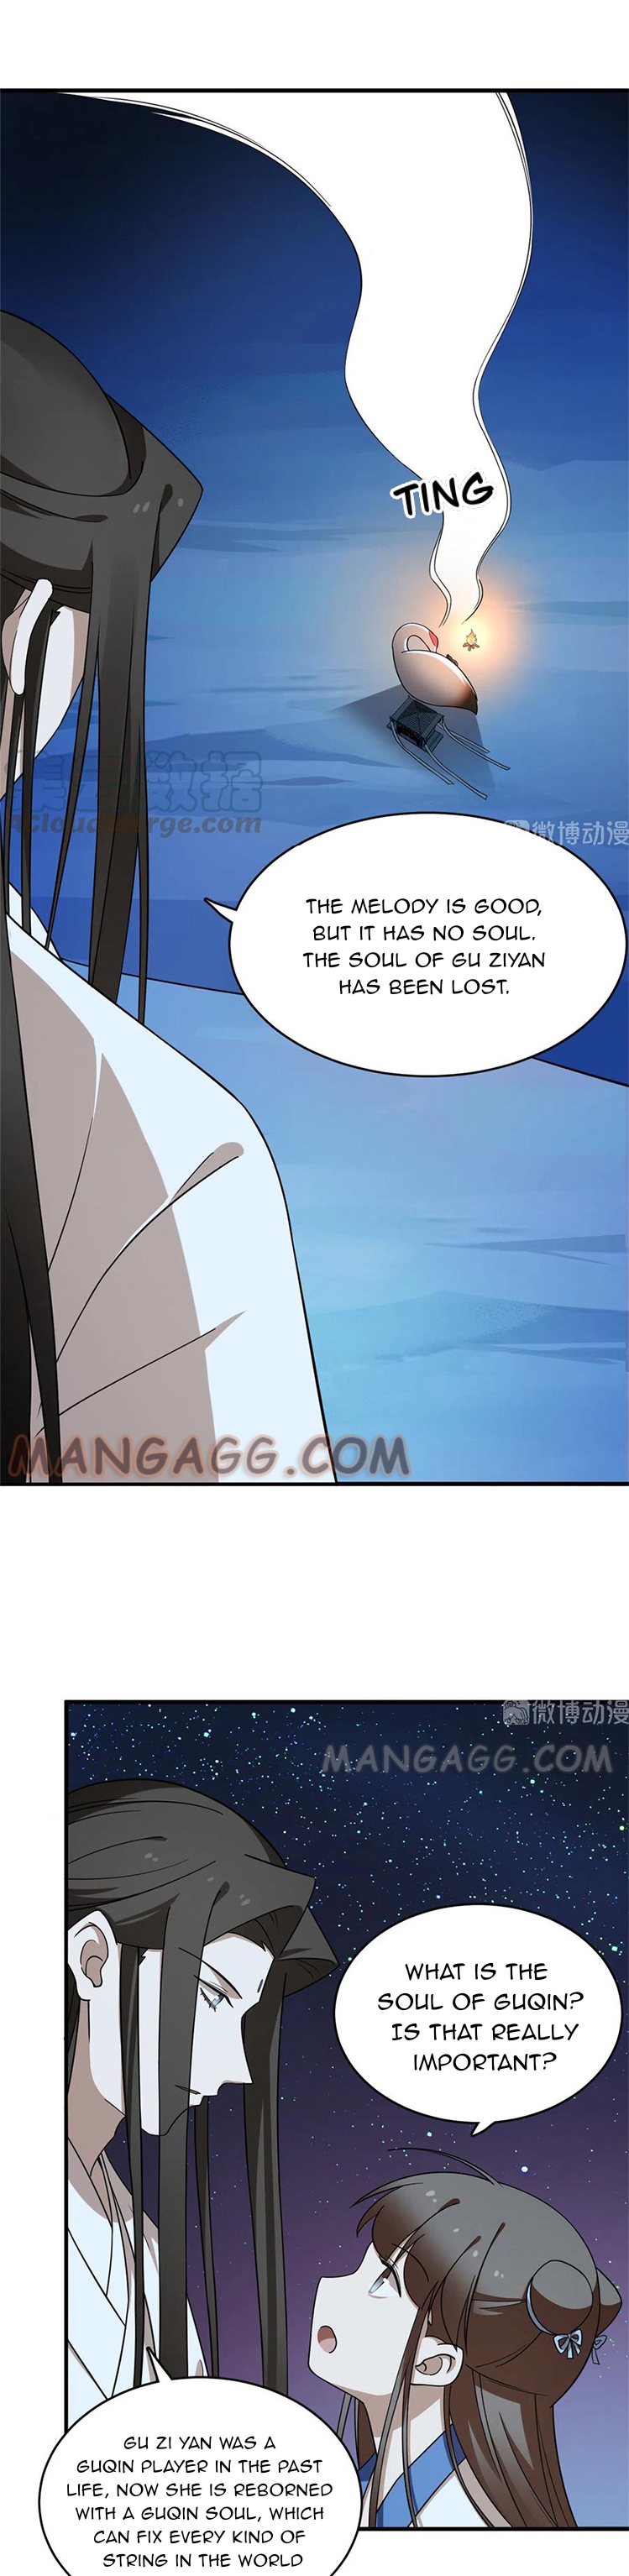 Queen of Posion: The Legend of a Super Agent, Doctor and Princess Chapter 204 - Page 8